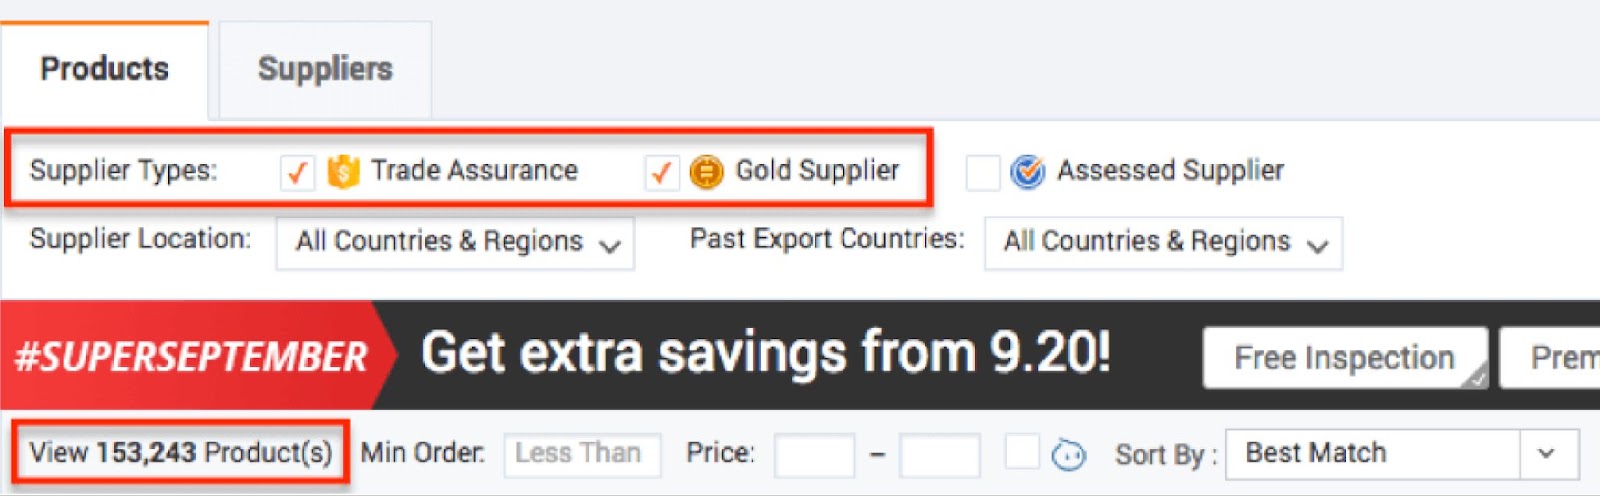 Here's A Screenshot Of Gold Supplier Status On Alibaba